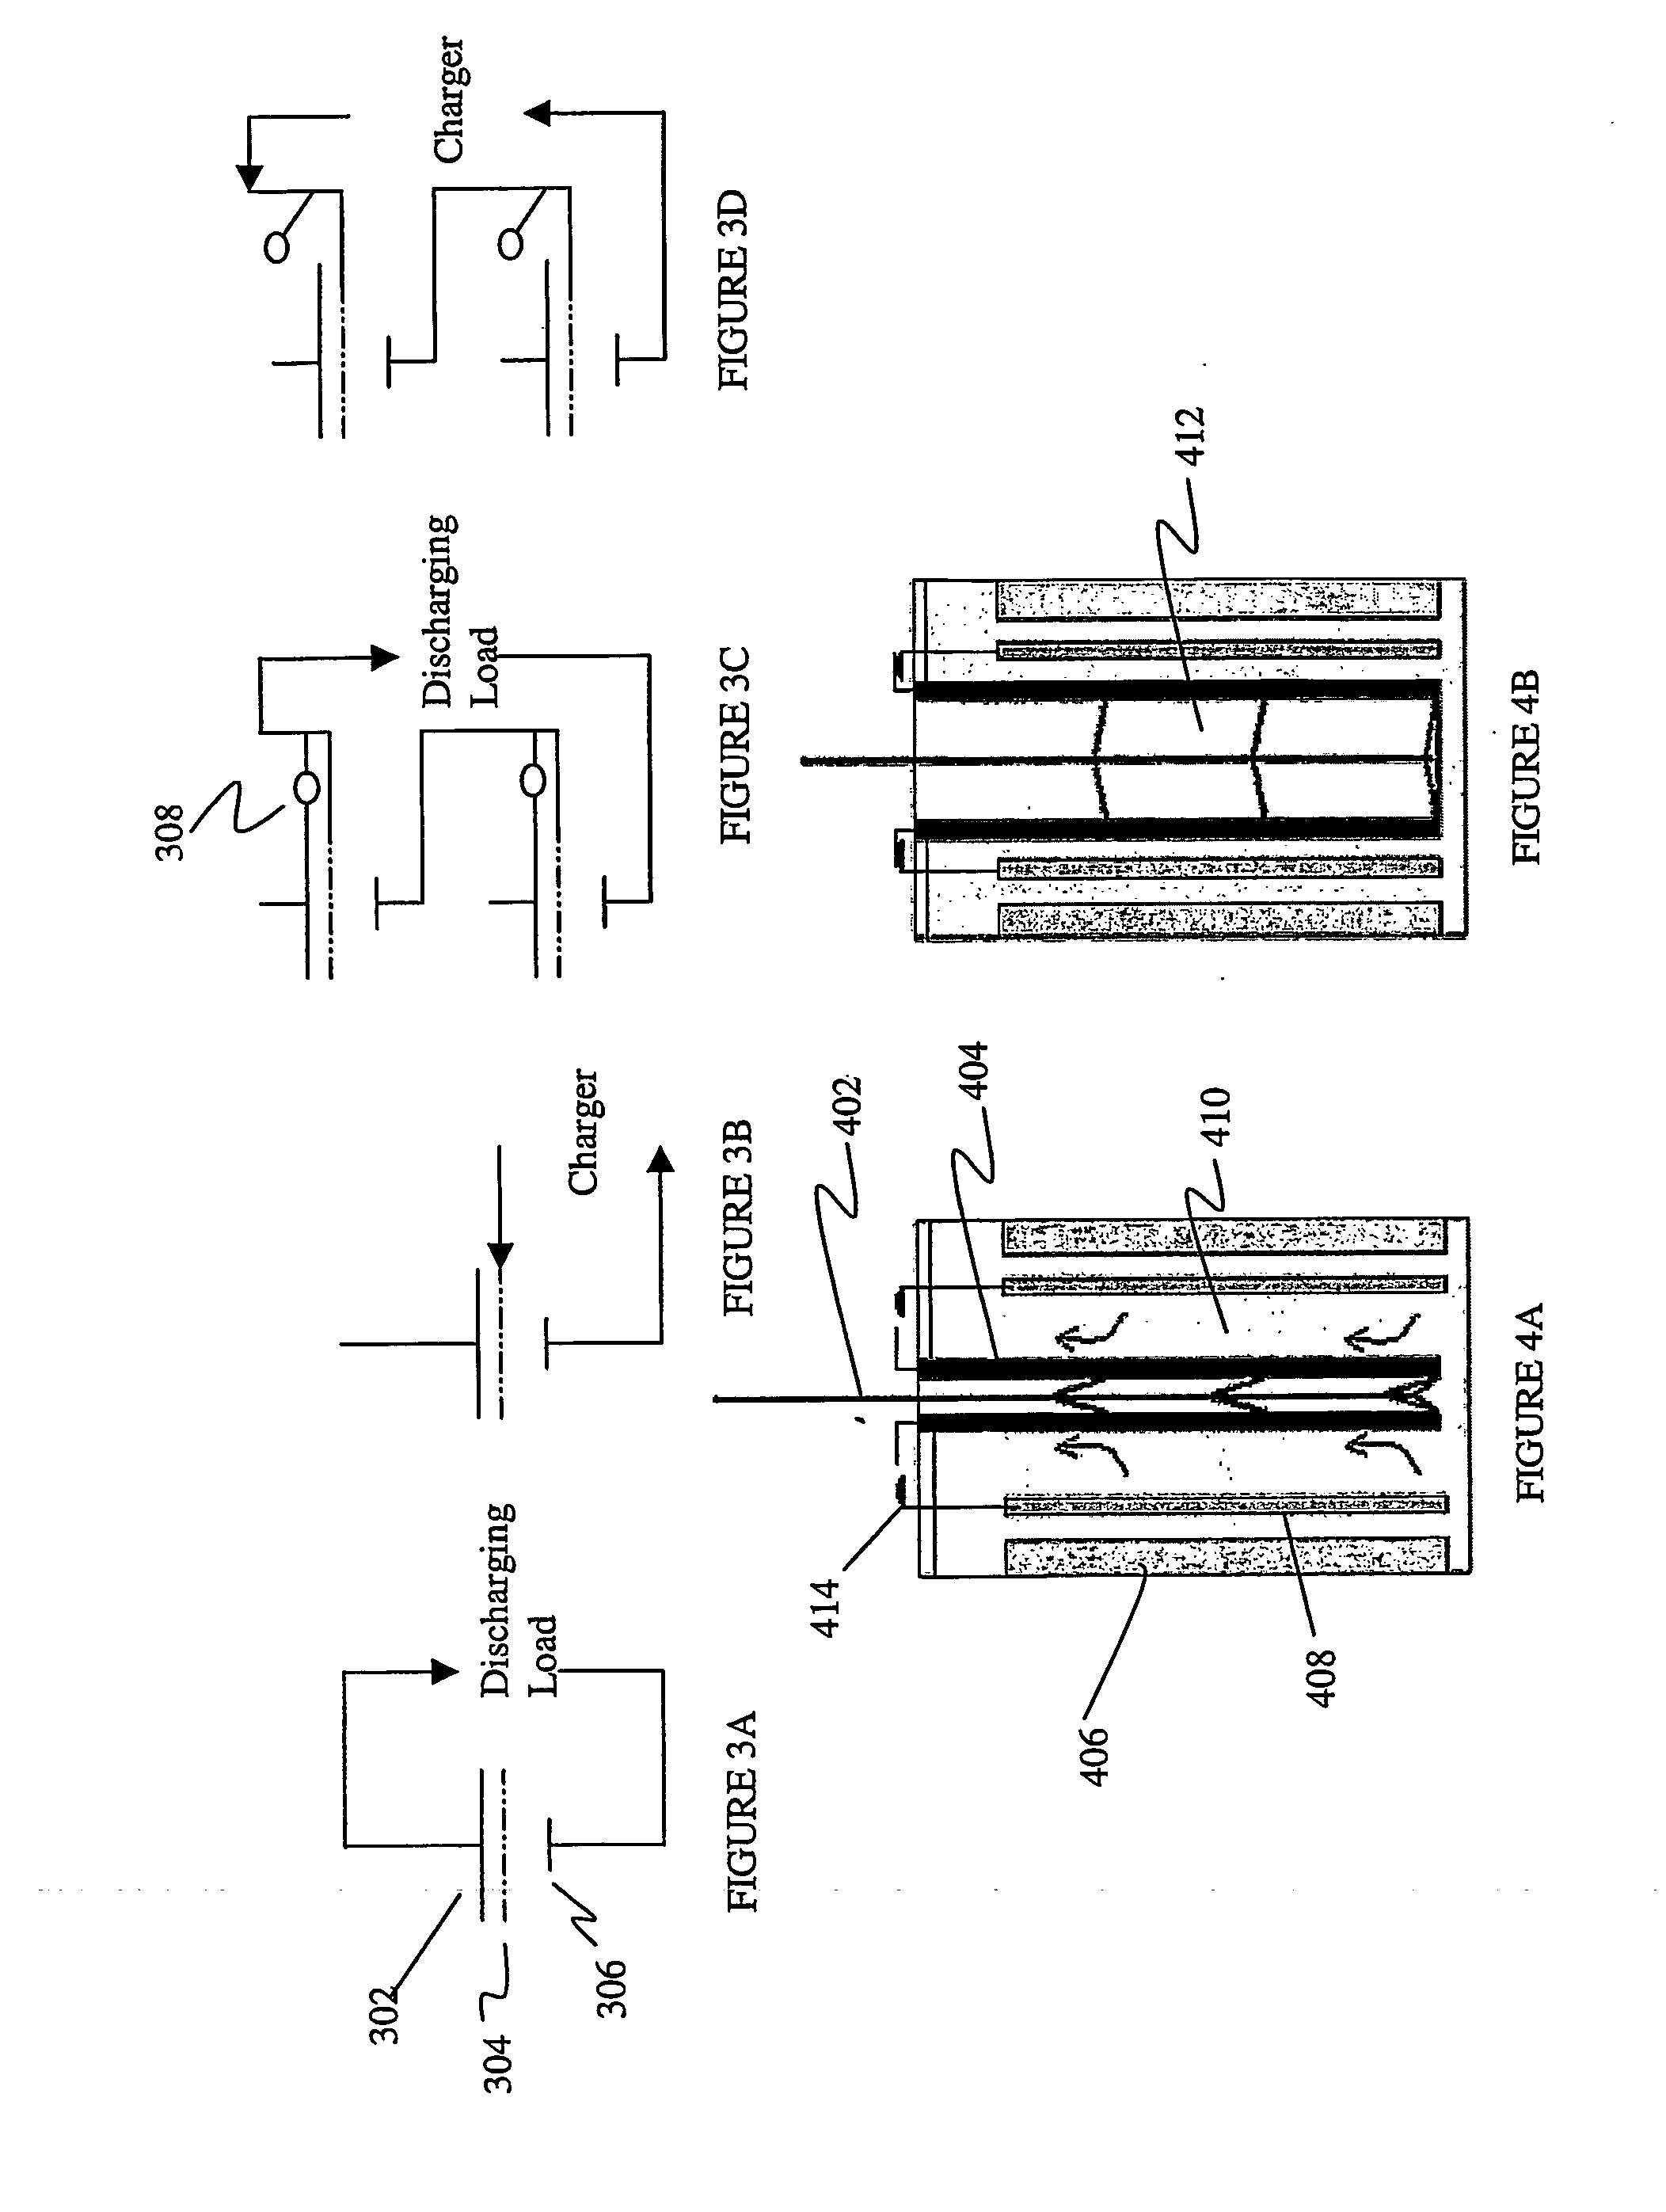 Rechargeable metal air electrochemical cell incorporating collapsible cathode assembly